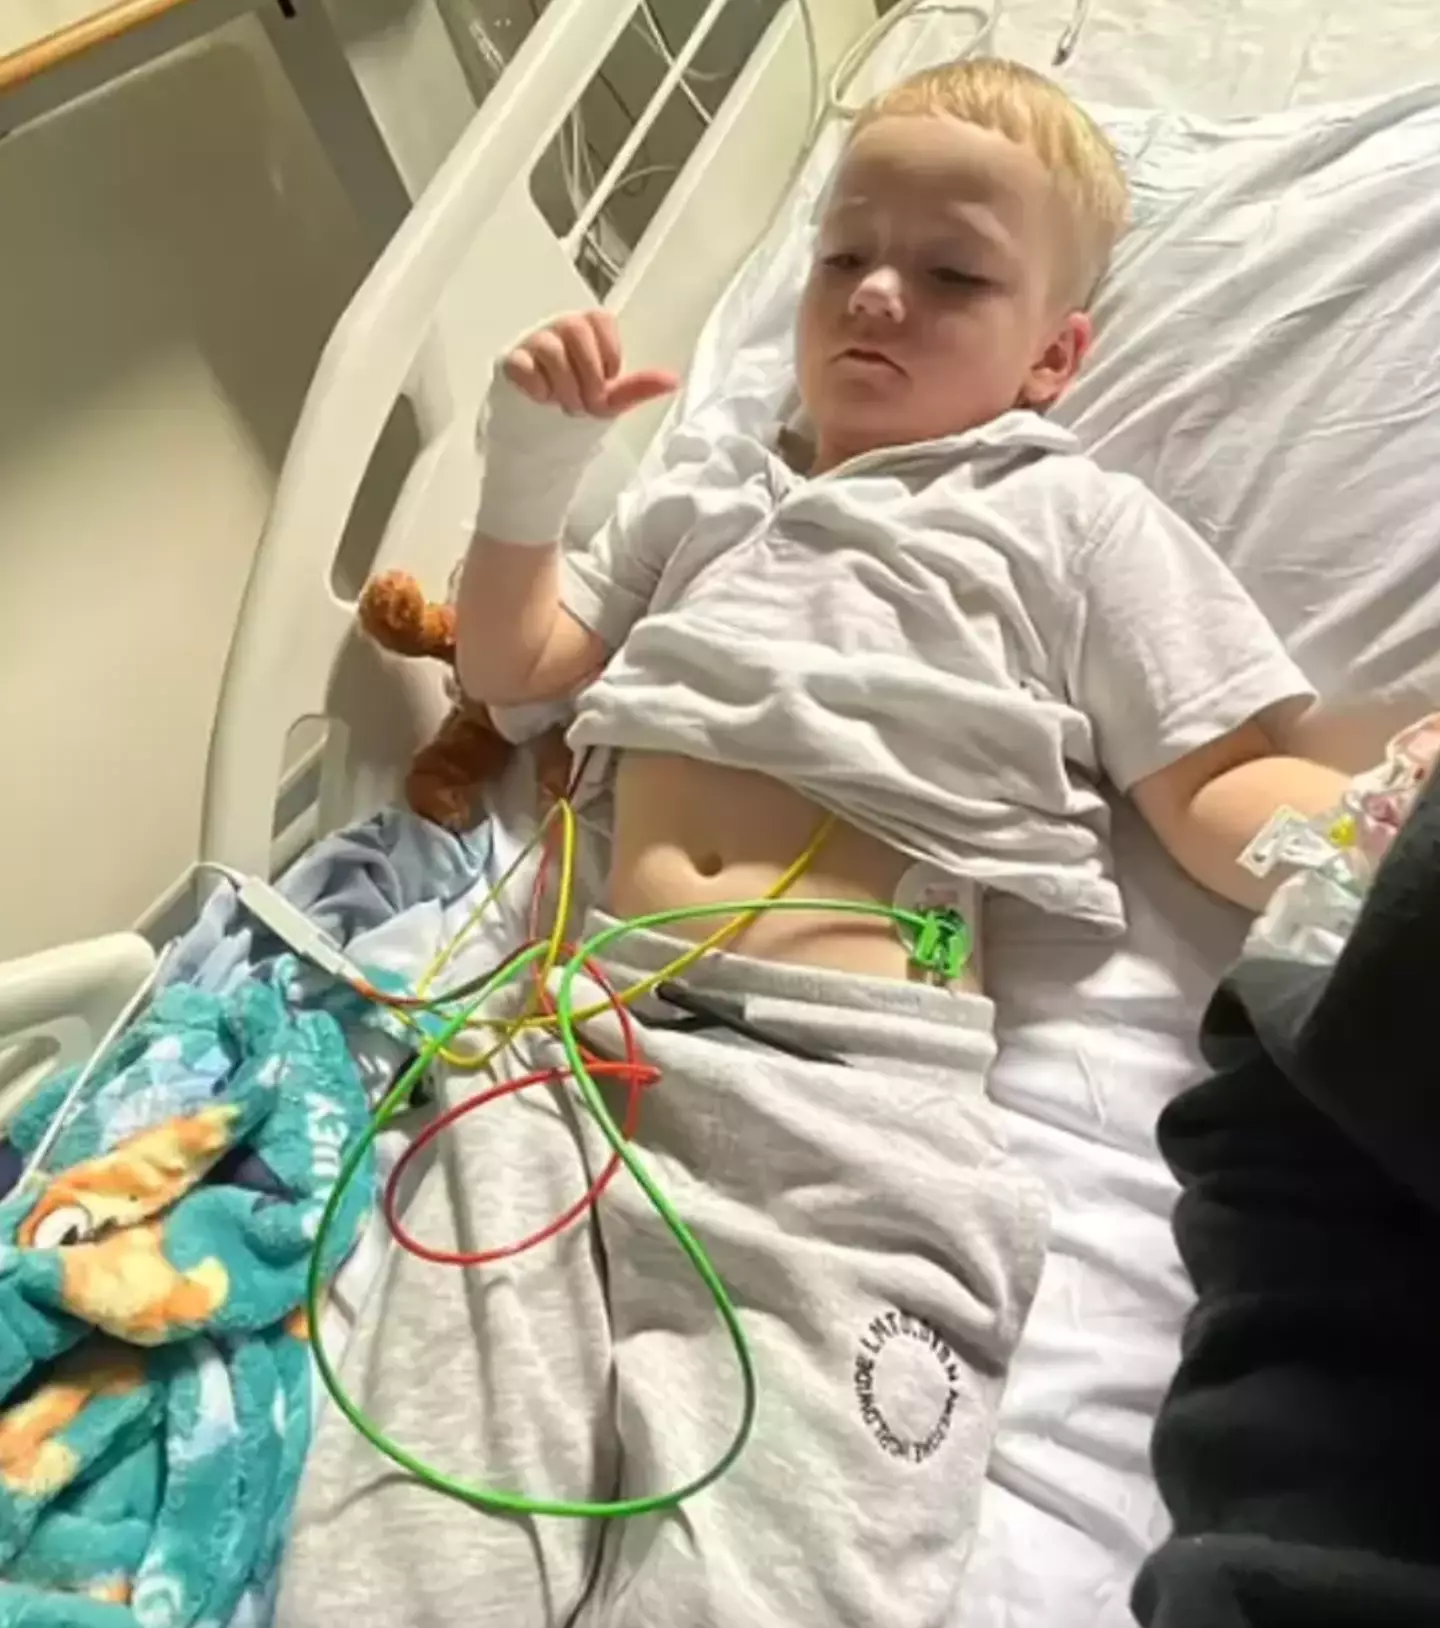 Four-year-old Albie was hospitalised for three days after drinking a strawberry-flavoured slushy.